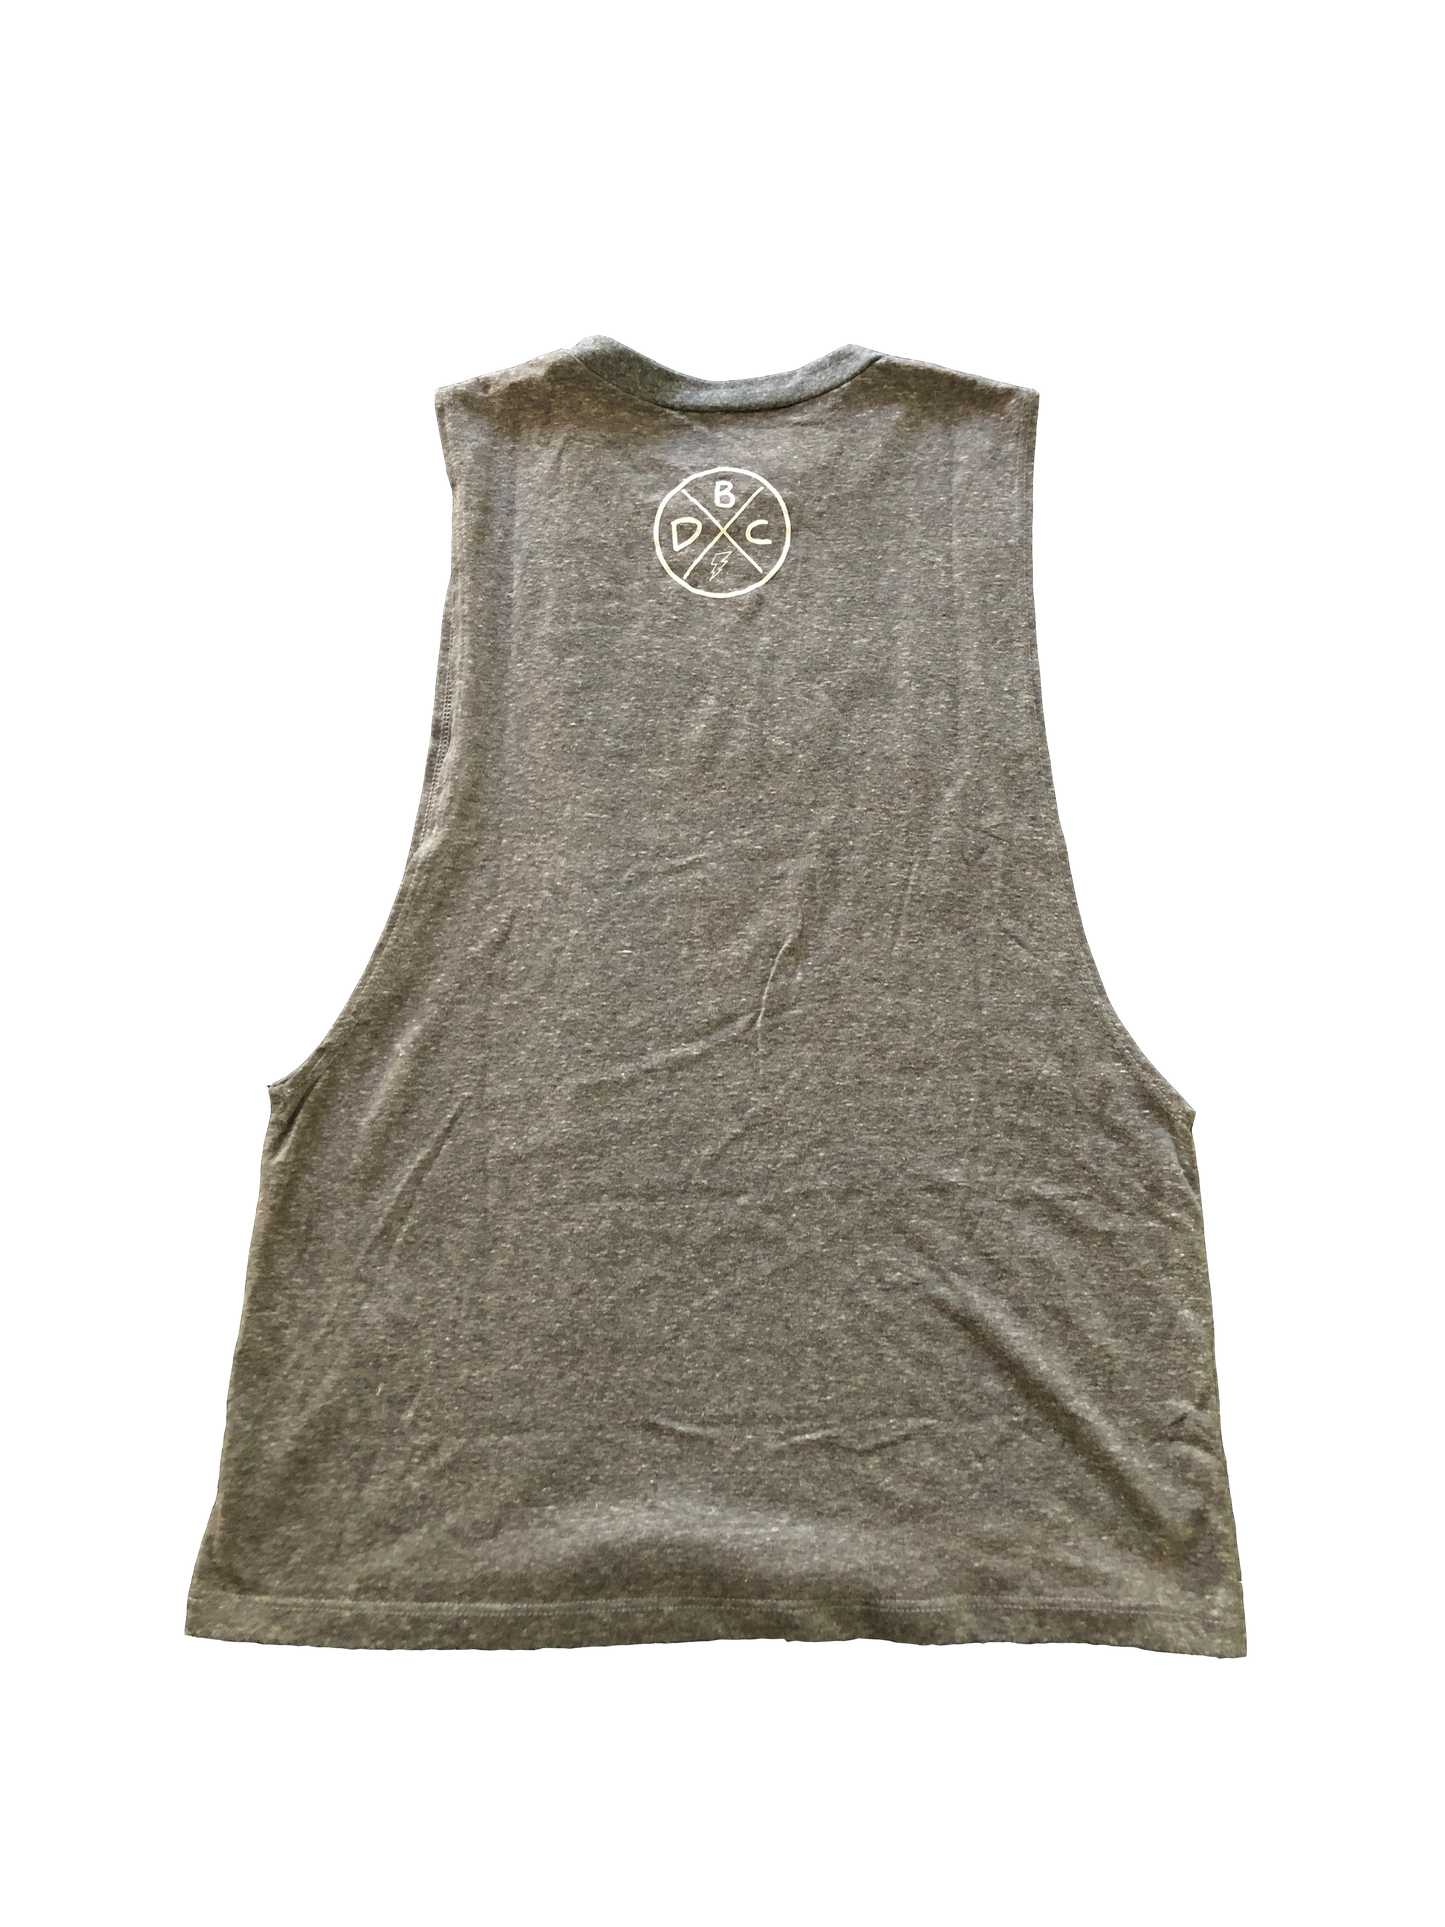 Train Dirty "Standard Issue" unisex muscle tank